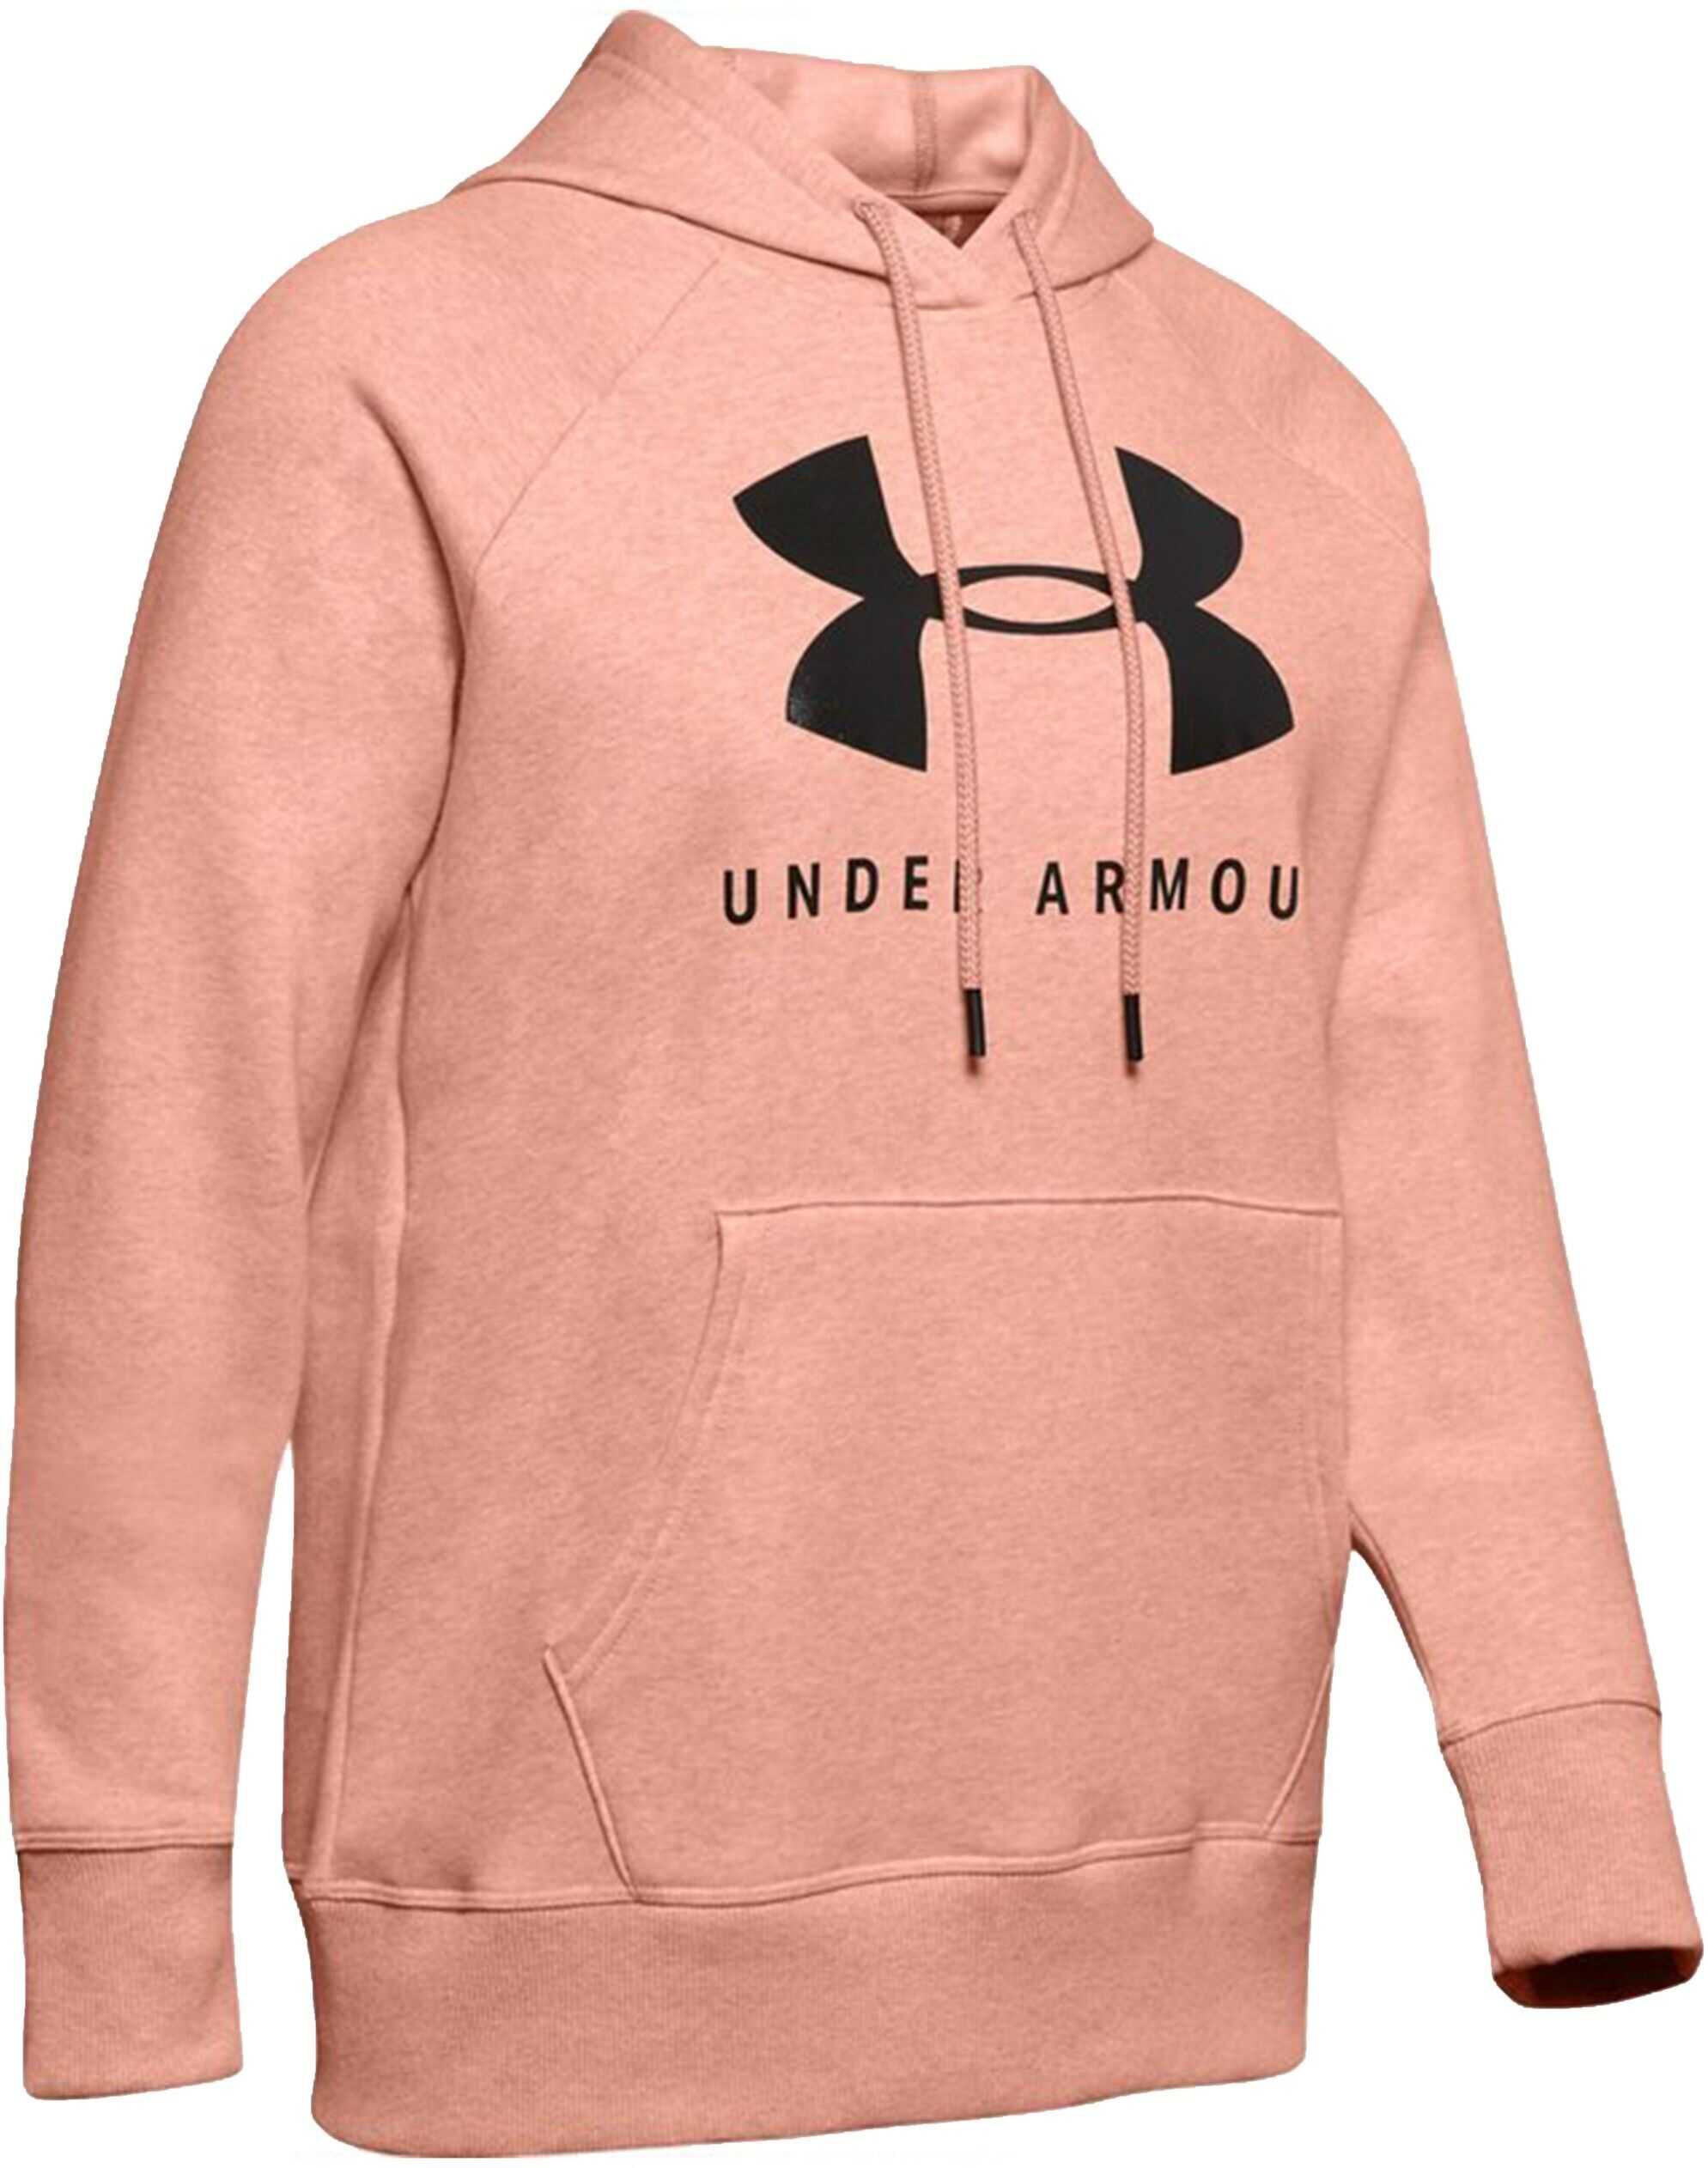 Under Armour Rival Fleece Graphic Hoodie Roz